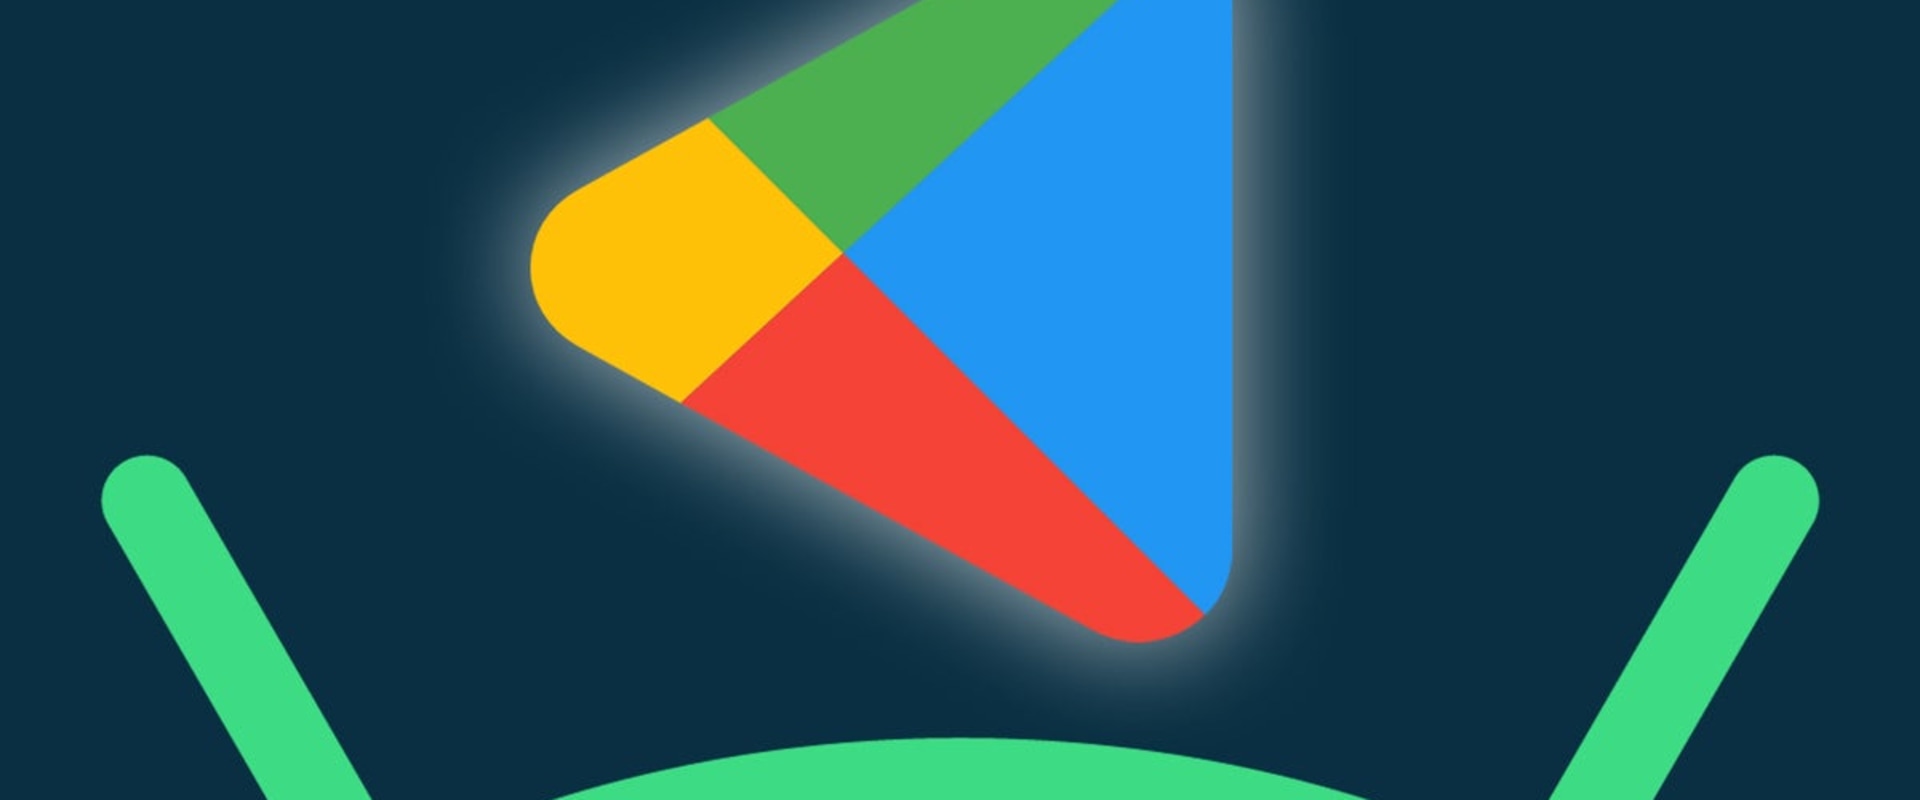 Google Play Store Arcade: A Comprehensive Overview